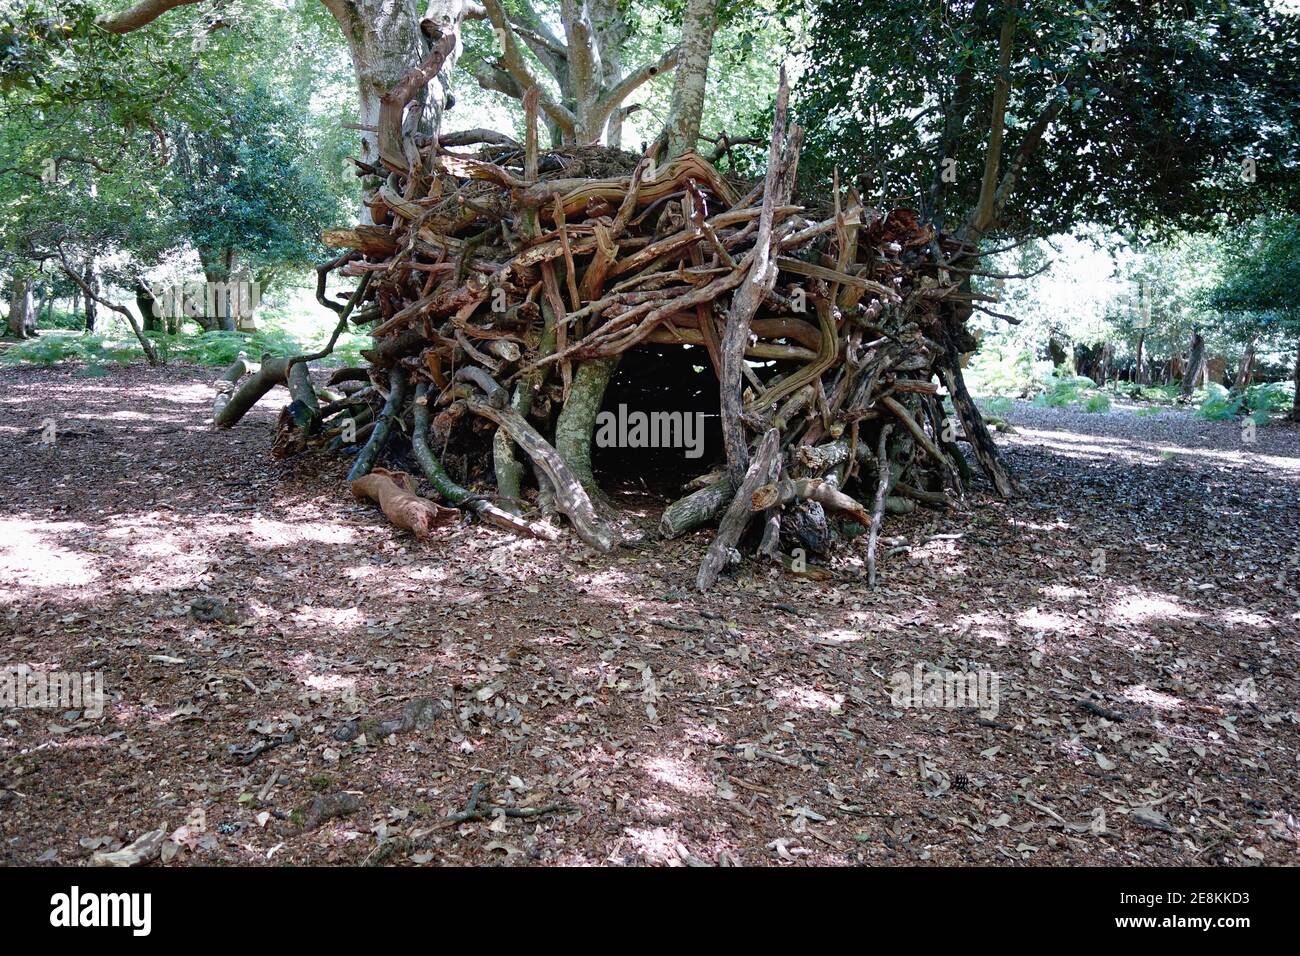 A shelter made of wooden branches in a forest Stock Photo